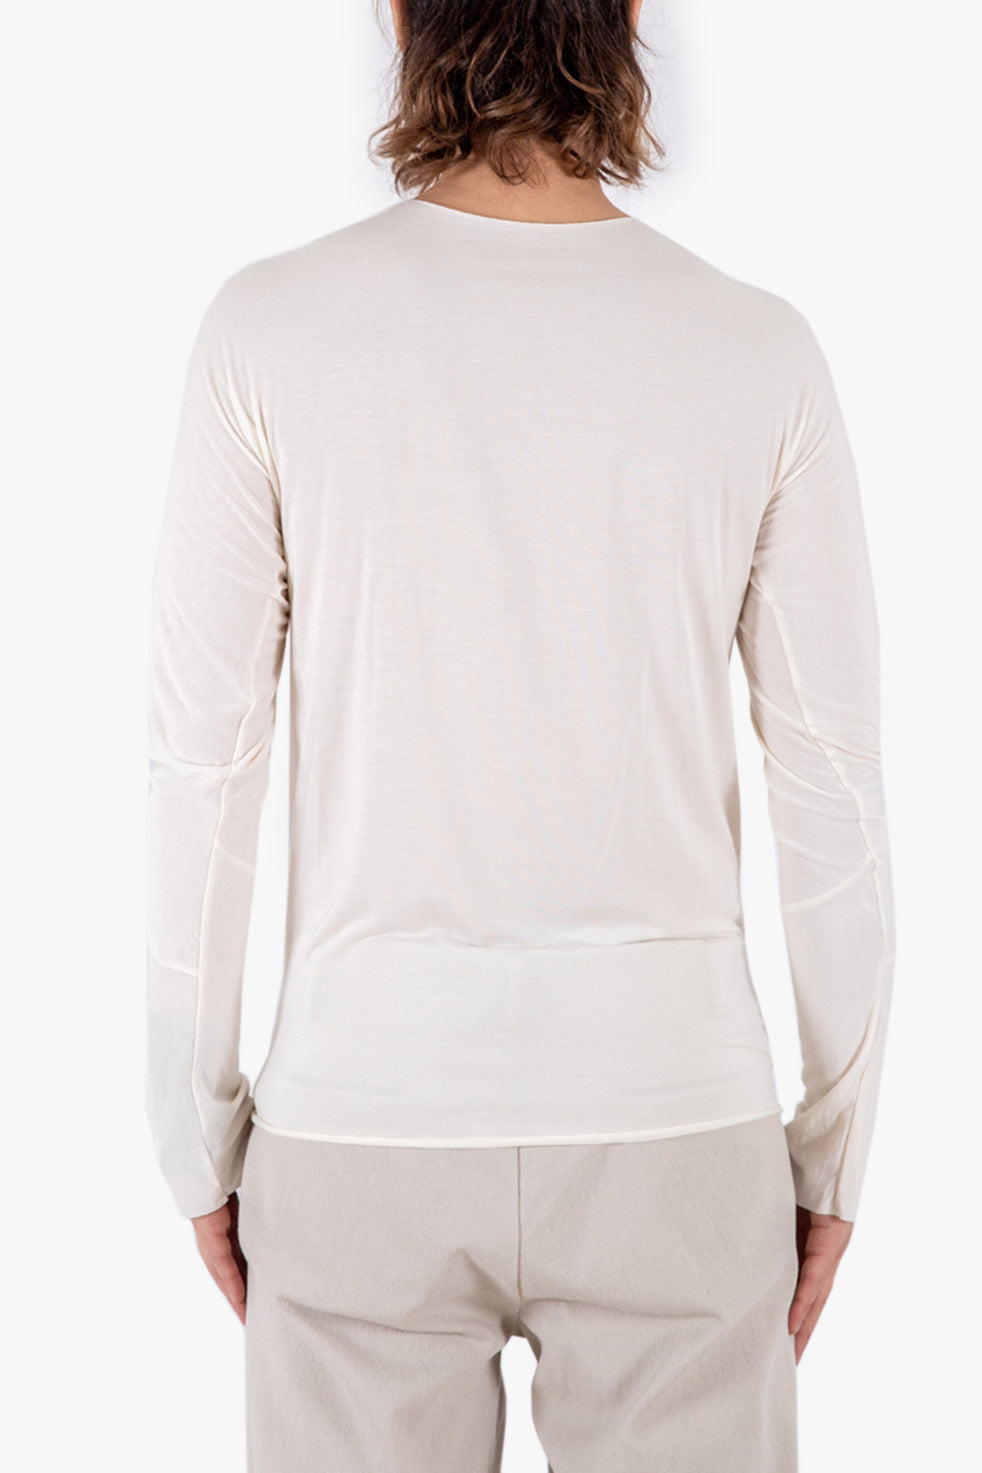 One piece long sleeve T-shirt WHITE